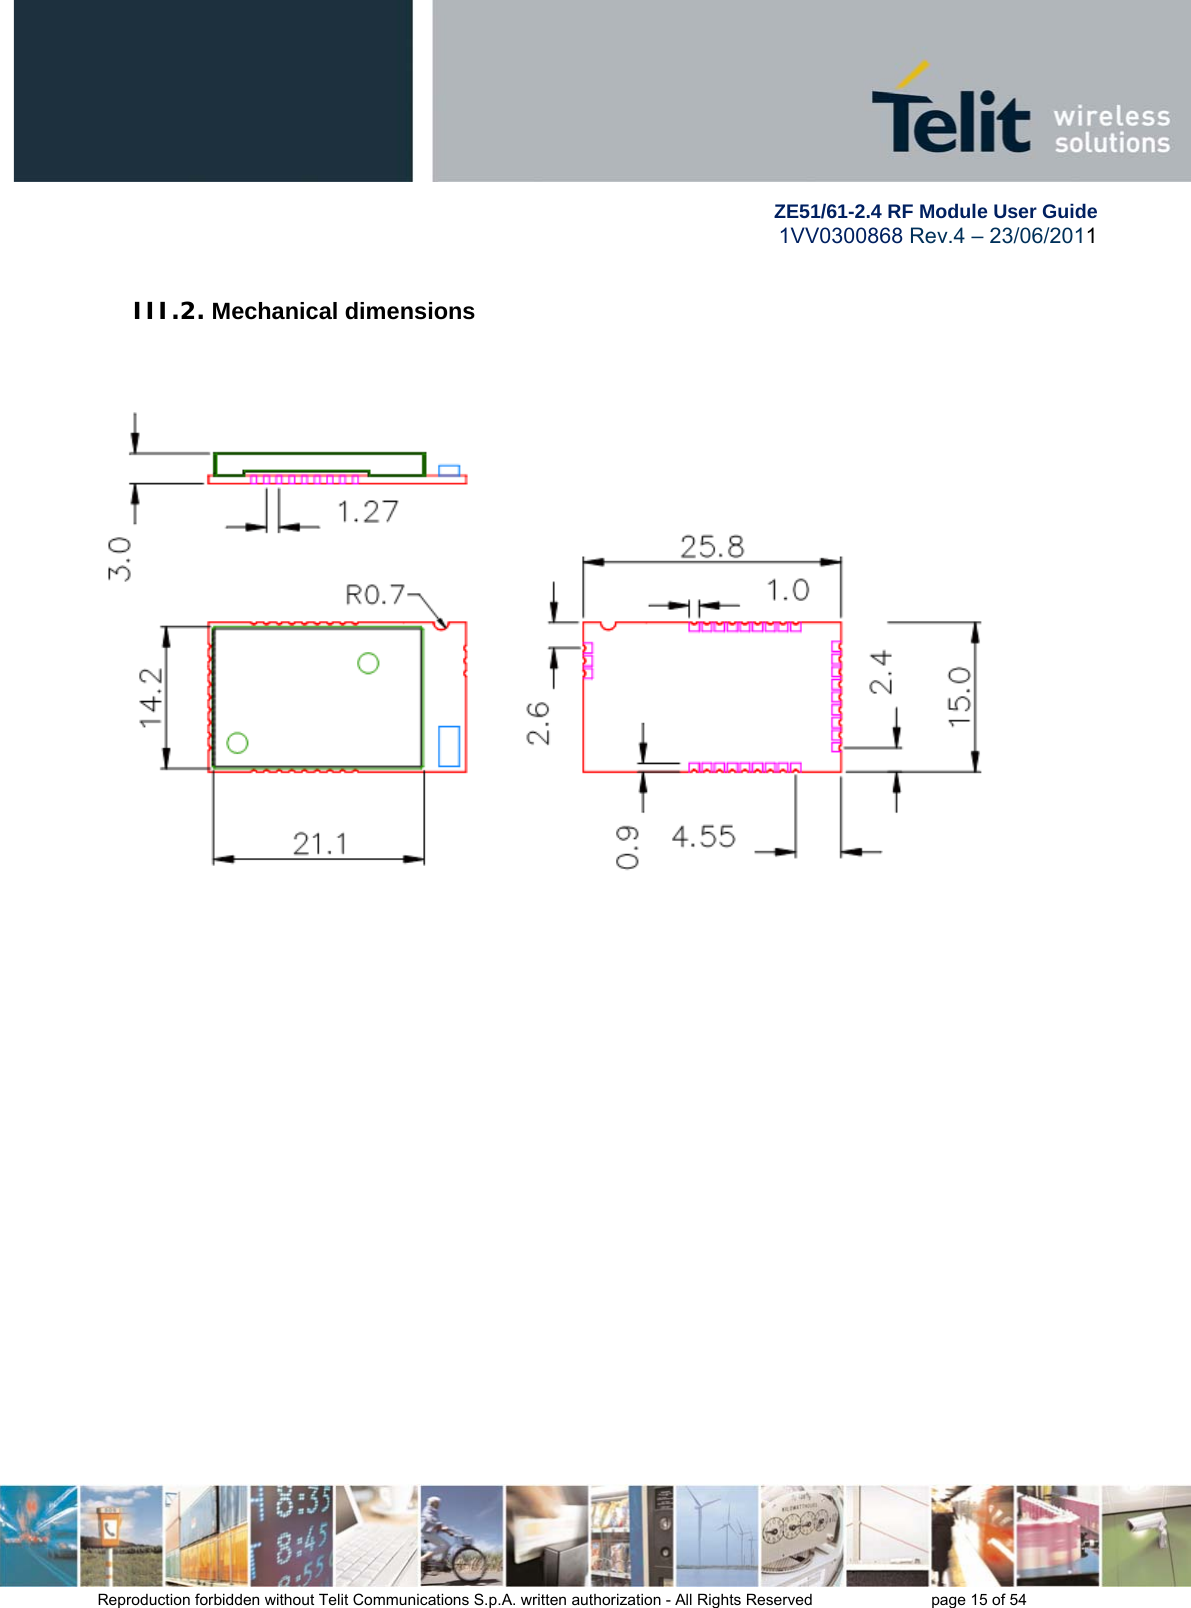        ZE51/61-2.4 RF Module User Guide 1VV0300868 Rev.4 – 23/06/2011 Reproduction forbidden without Telit Communications S.p.A. written authorization - All Rights Reserved    page 15 of 54  III.2. Mechanical dimensions    